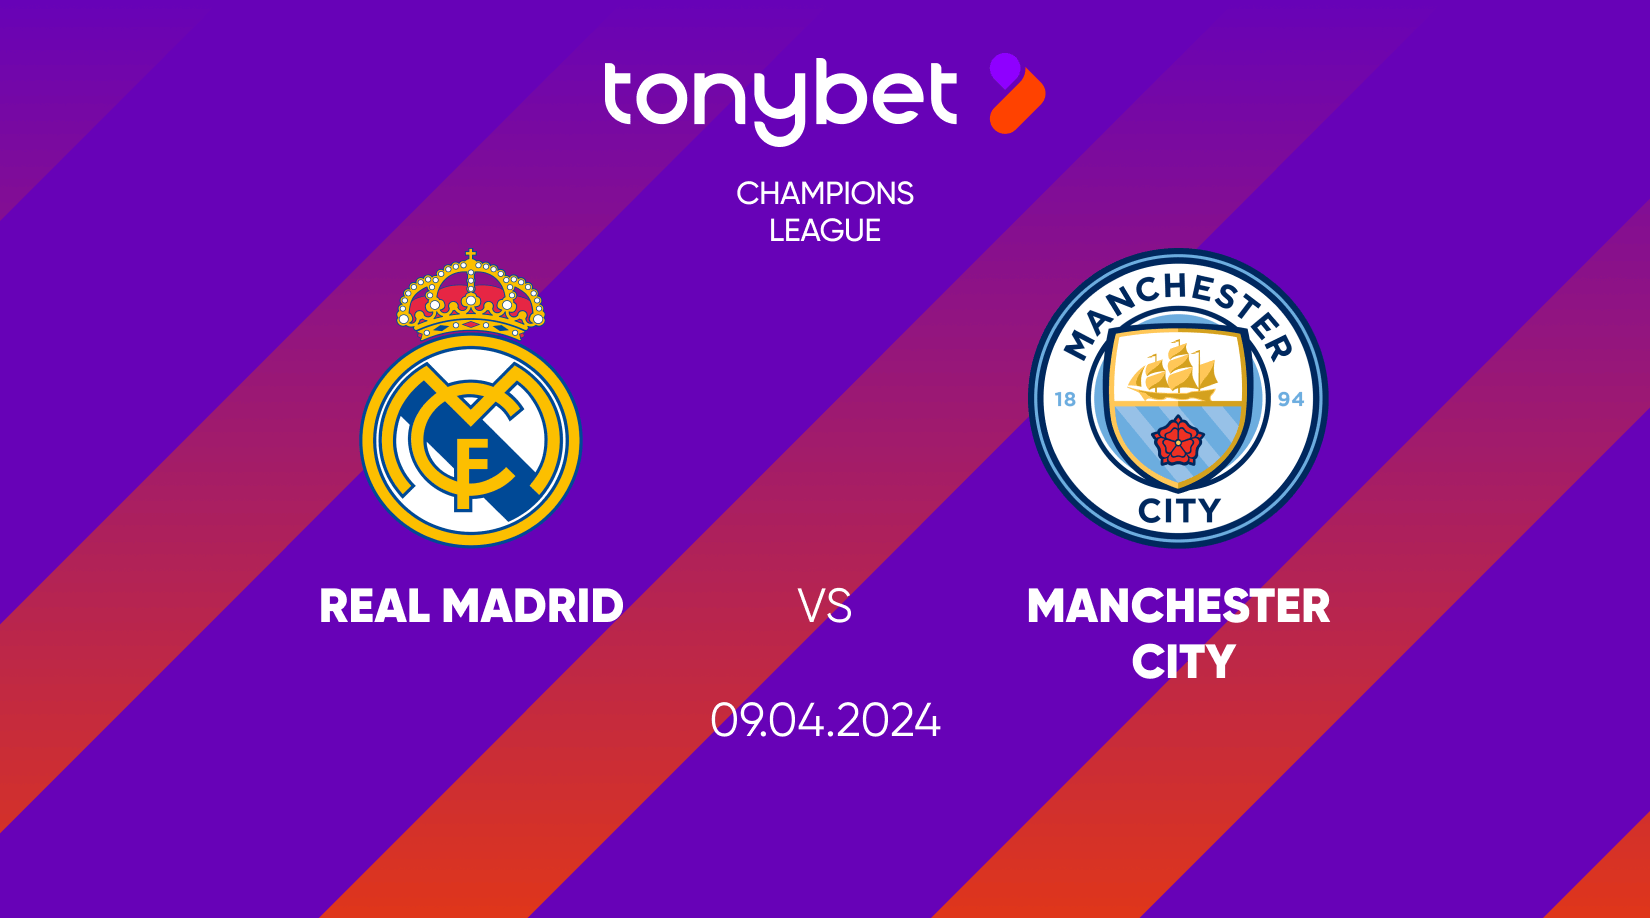 Real Madrid vs Manchester City, Prediction, Odds and Betting Tips 09/04/2024